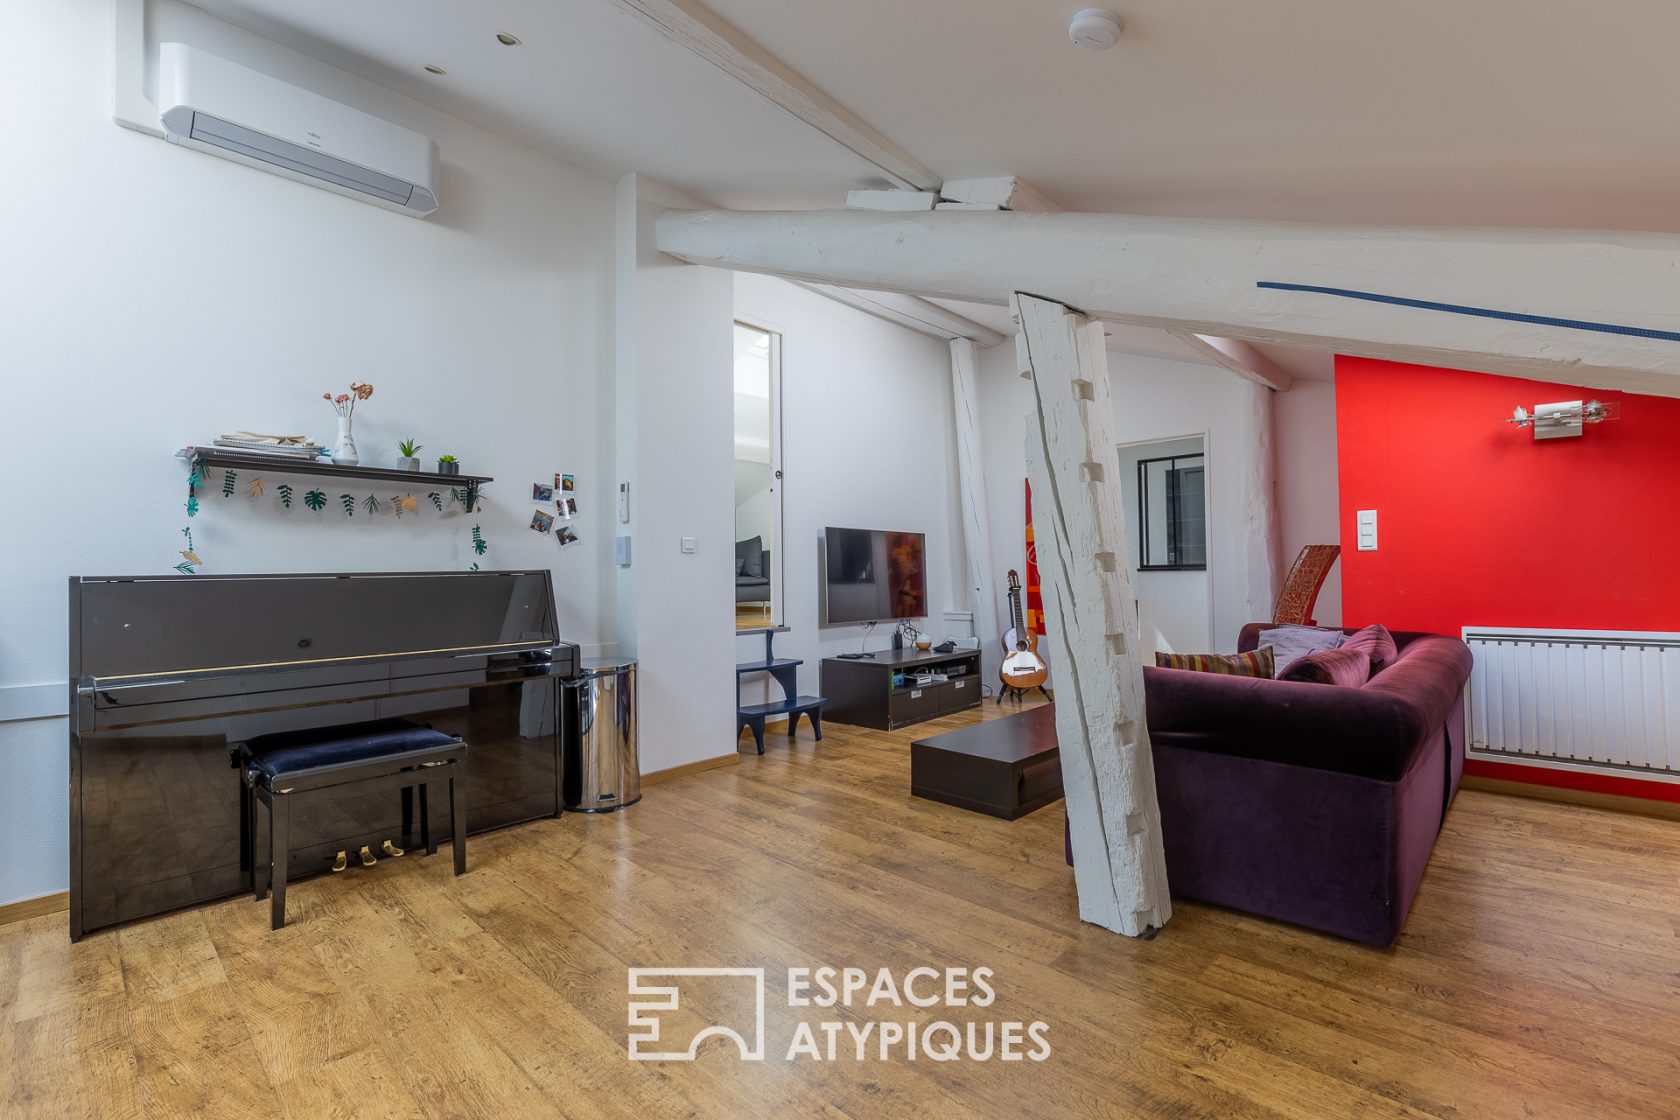 Luxury duplex apartment in the heart of the city